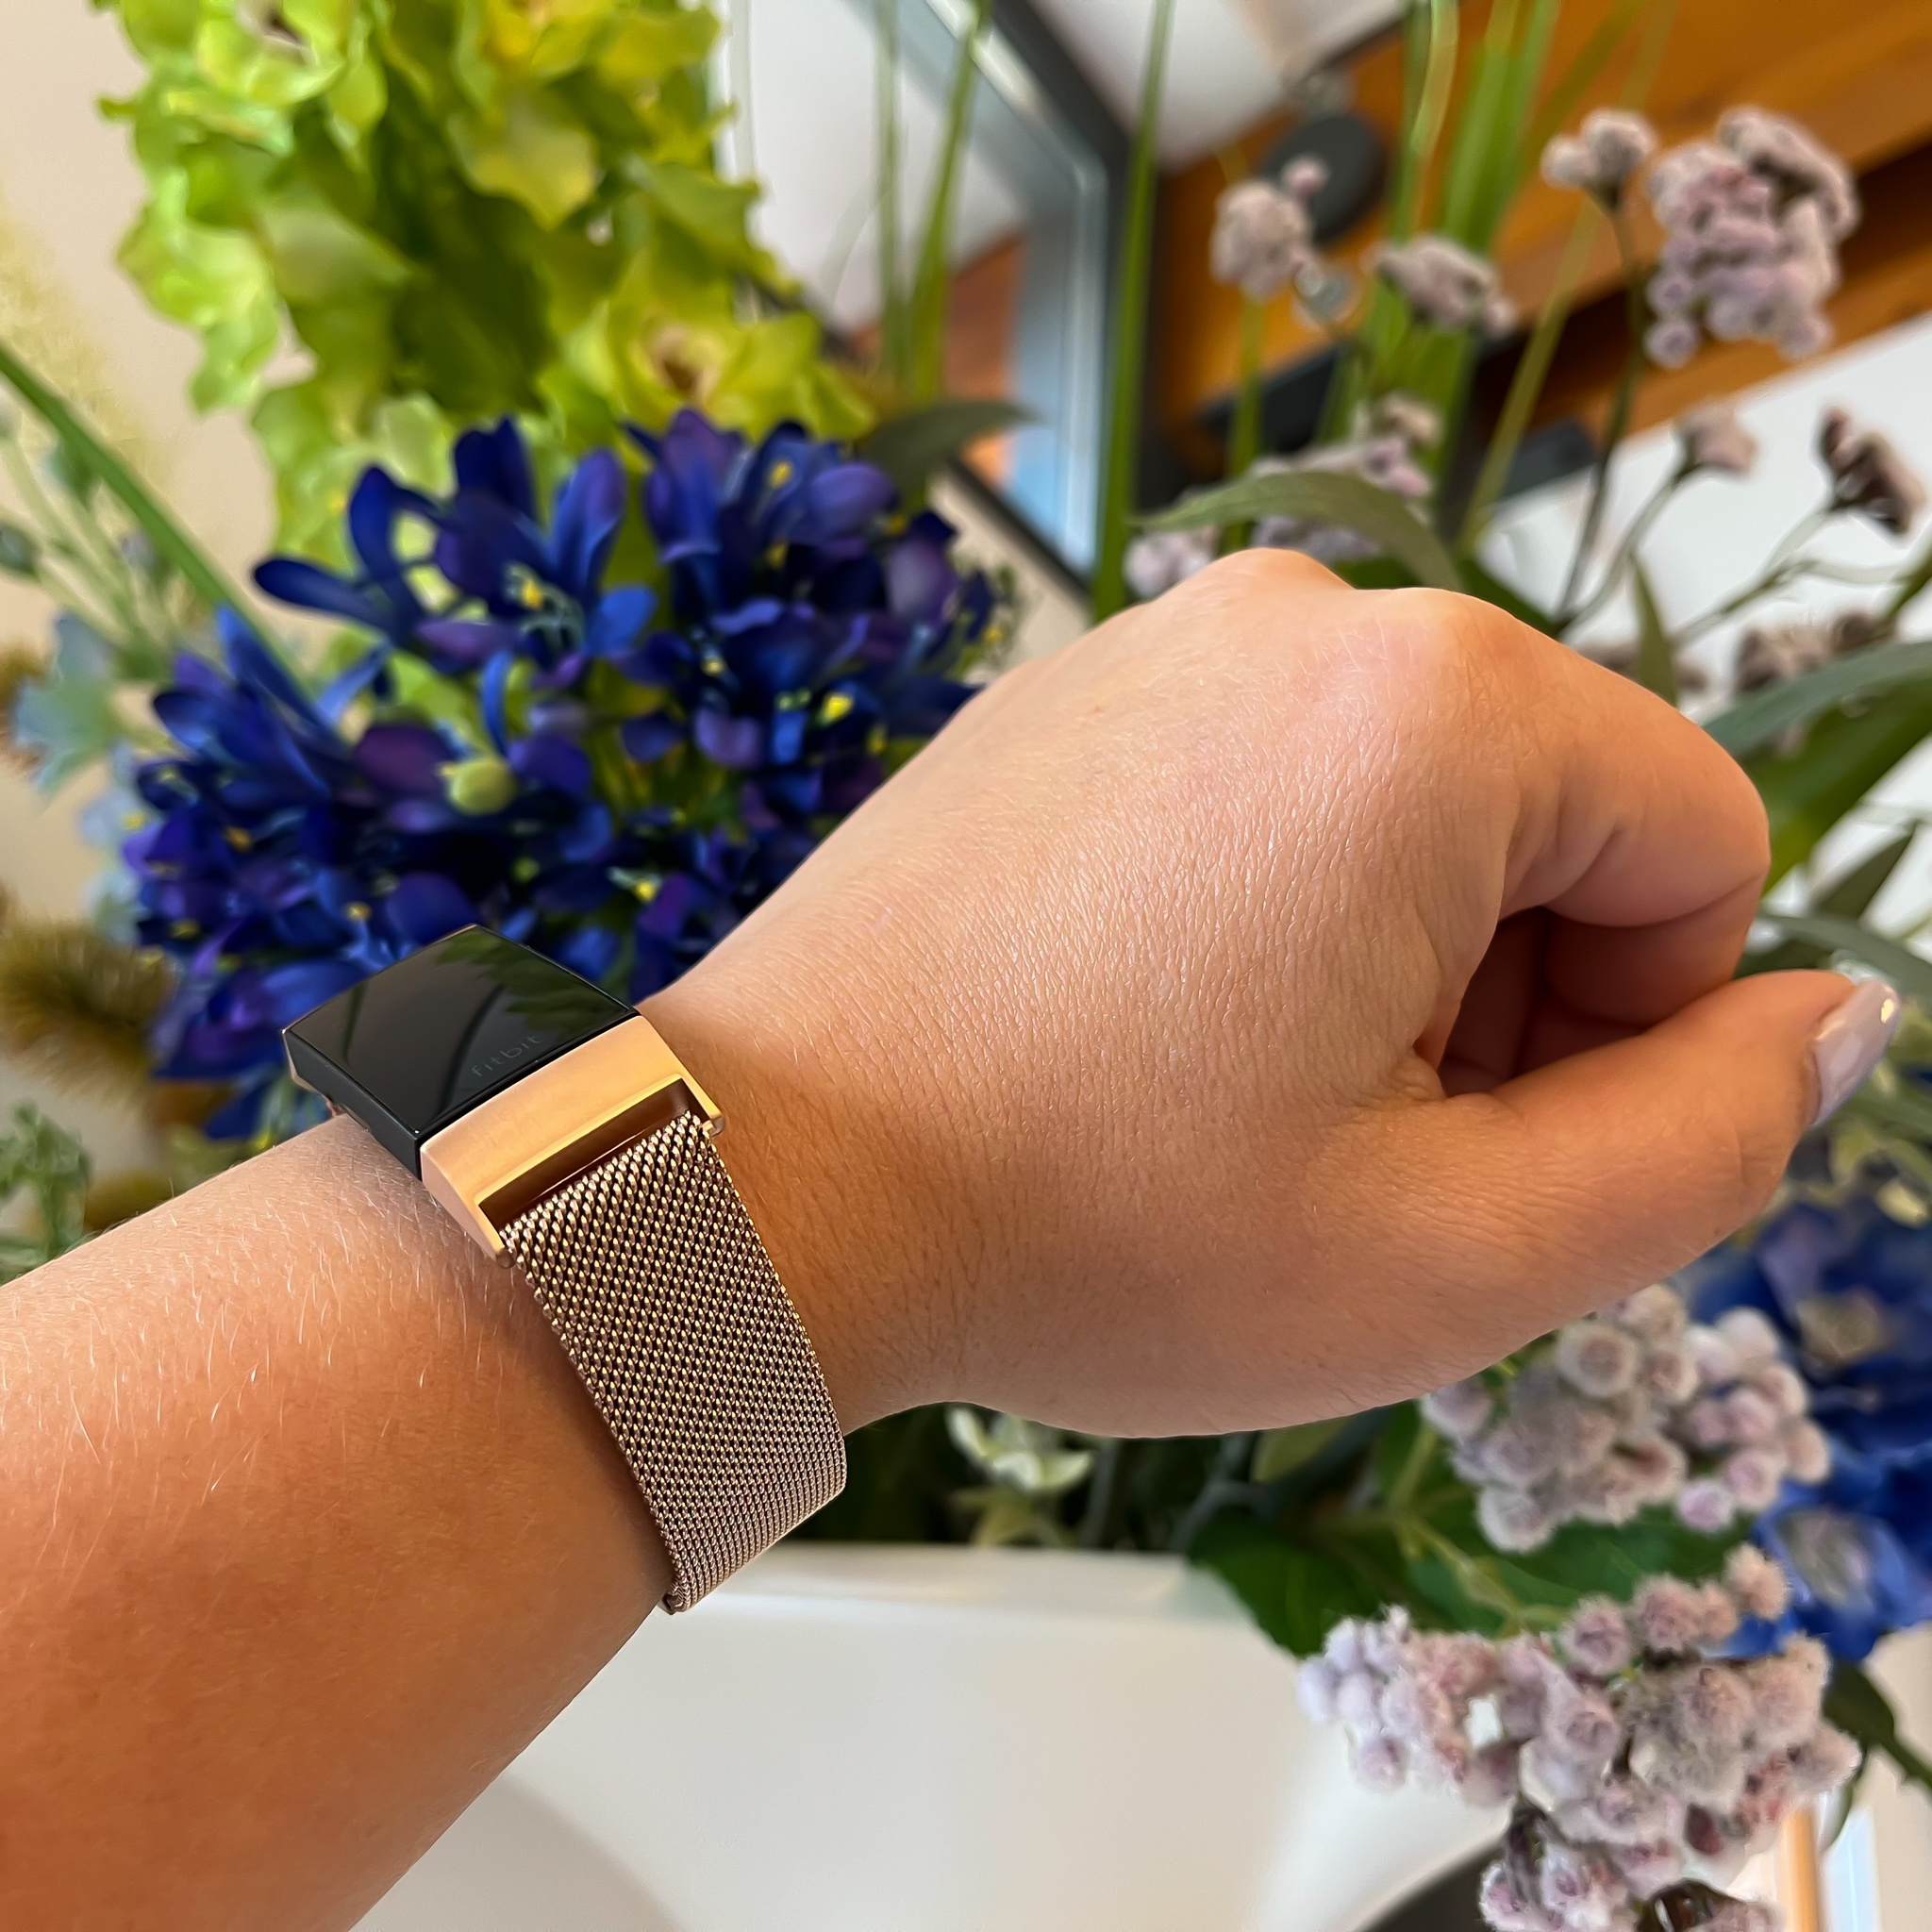 Fitbit Charge 3 & 4 Milanaise Armband - rose gold